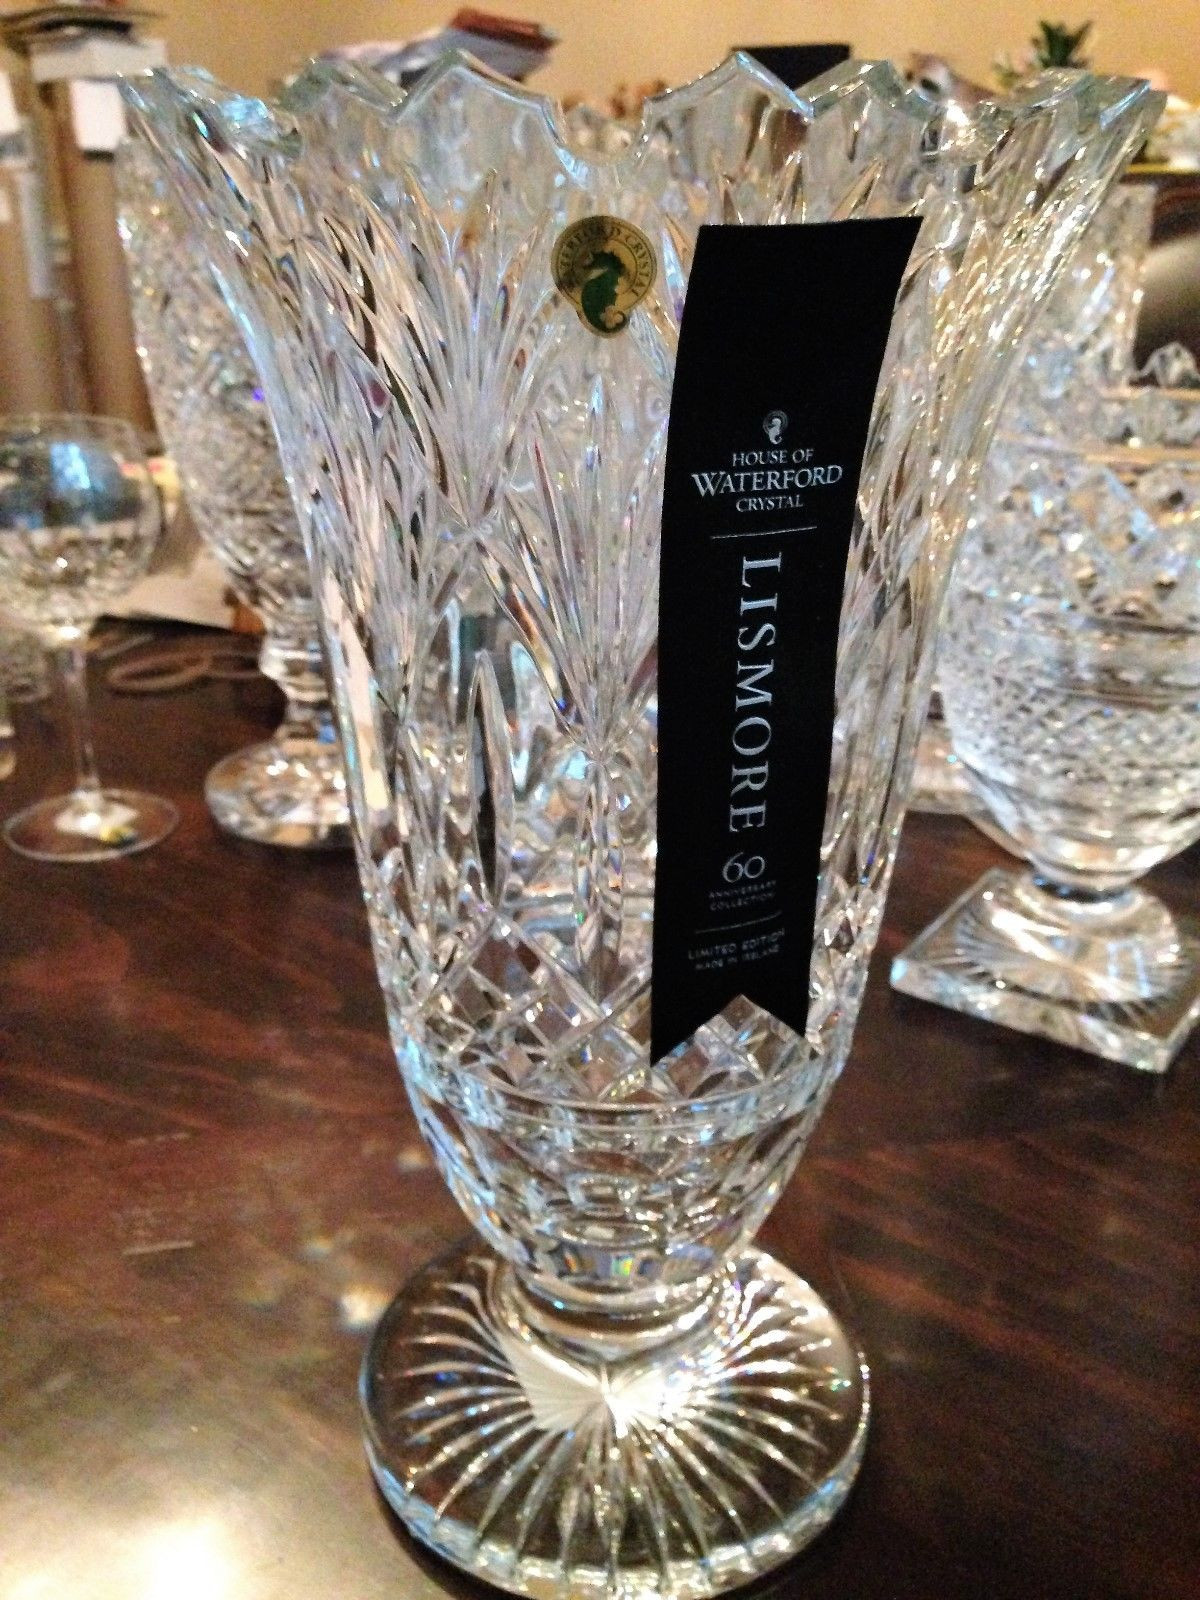 13 Lovely Waterford Lismore Thistle Vase 2024 free download waterford lismore thistle vase of waterford crystal jim oleary lismore gate footed vase 156517 ebay inside norton secured powered by verisign